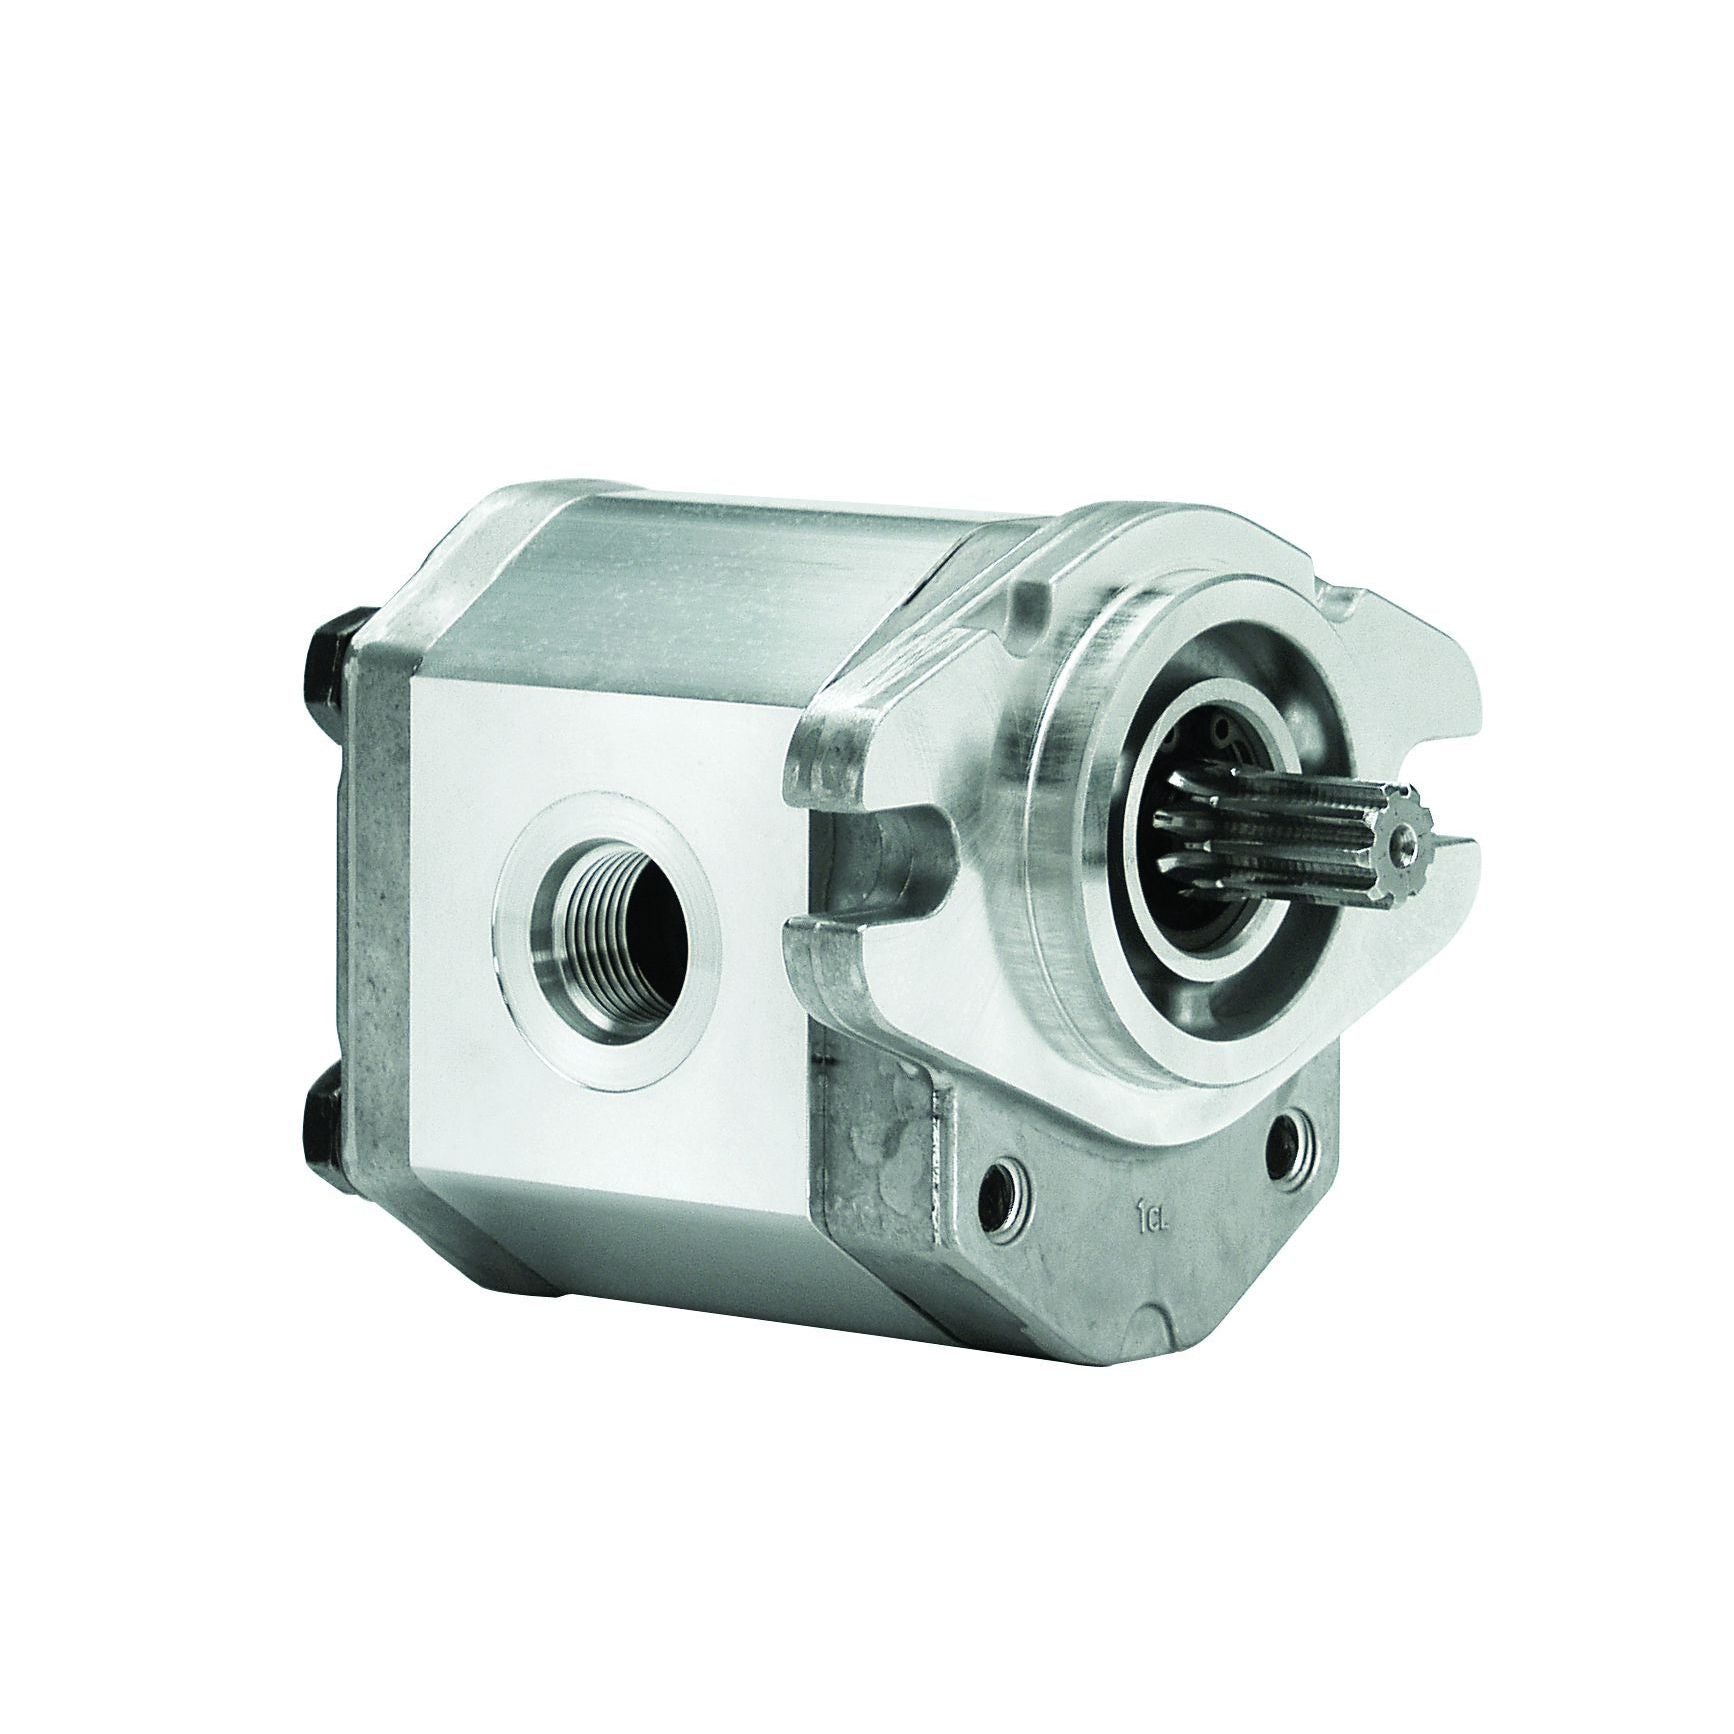 ALP1A-D-7-S1 : Marzocchi Gear Pump, CW, 5.2cc (0.3172in3), 2.47 GPM, 3335psi, 3500 RPM, #8 SAE (1/2") In, #6 SAE (3/8") Out, Splined Shaft 9T 20/40DP, SAE AA 2-Bolt Mount